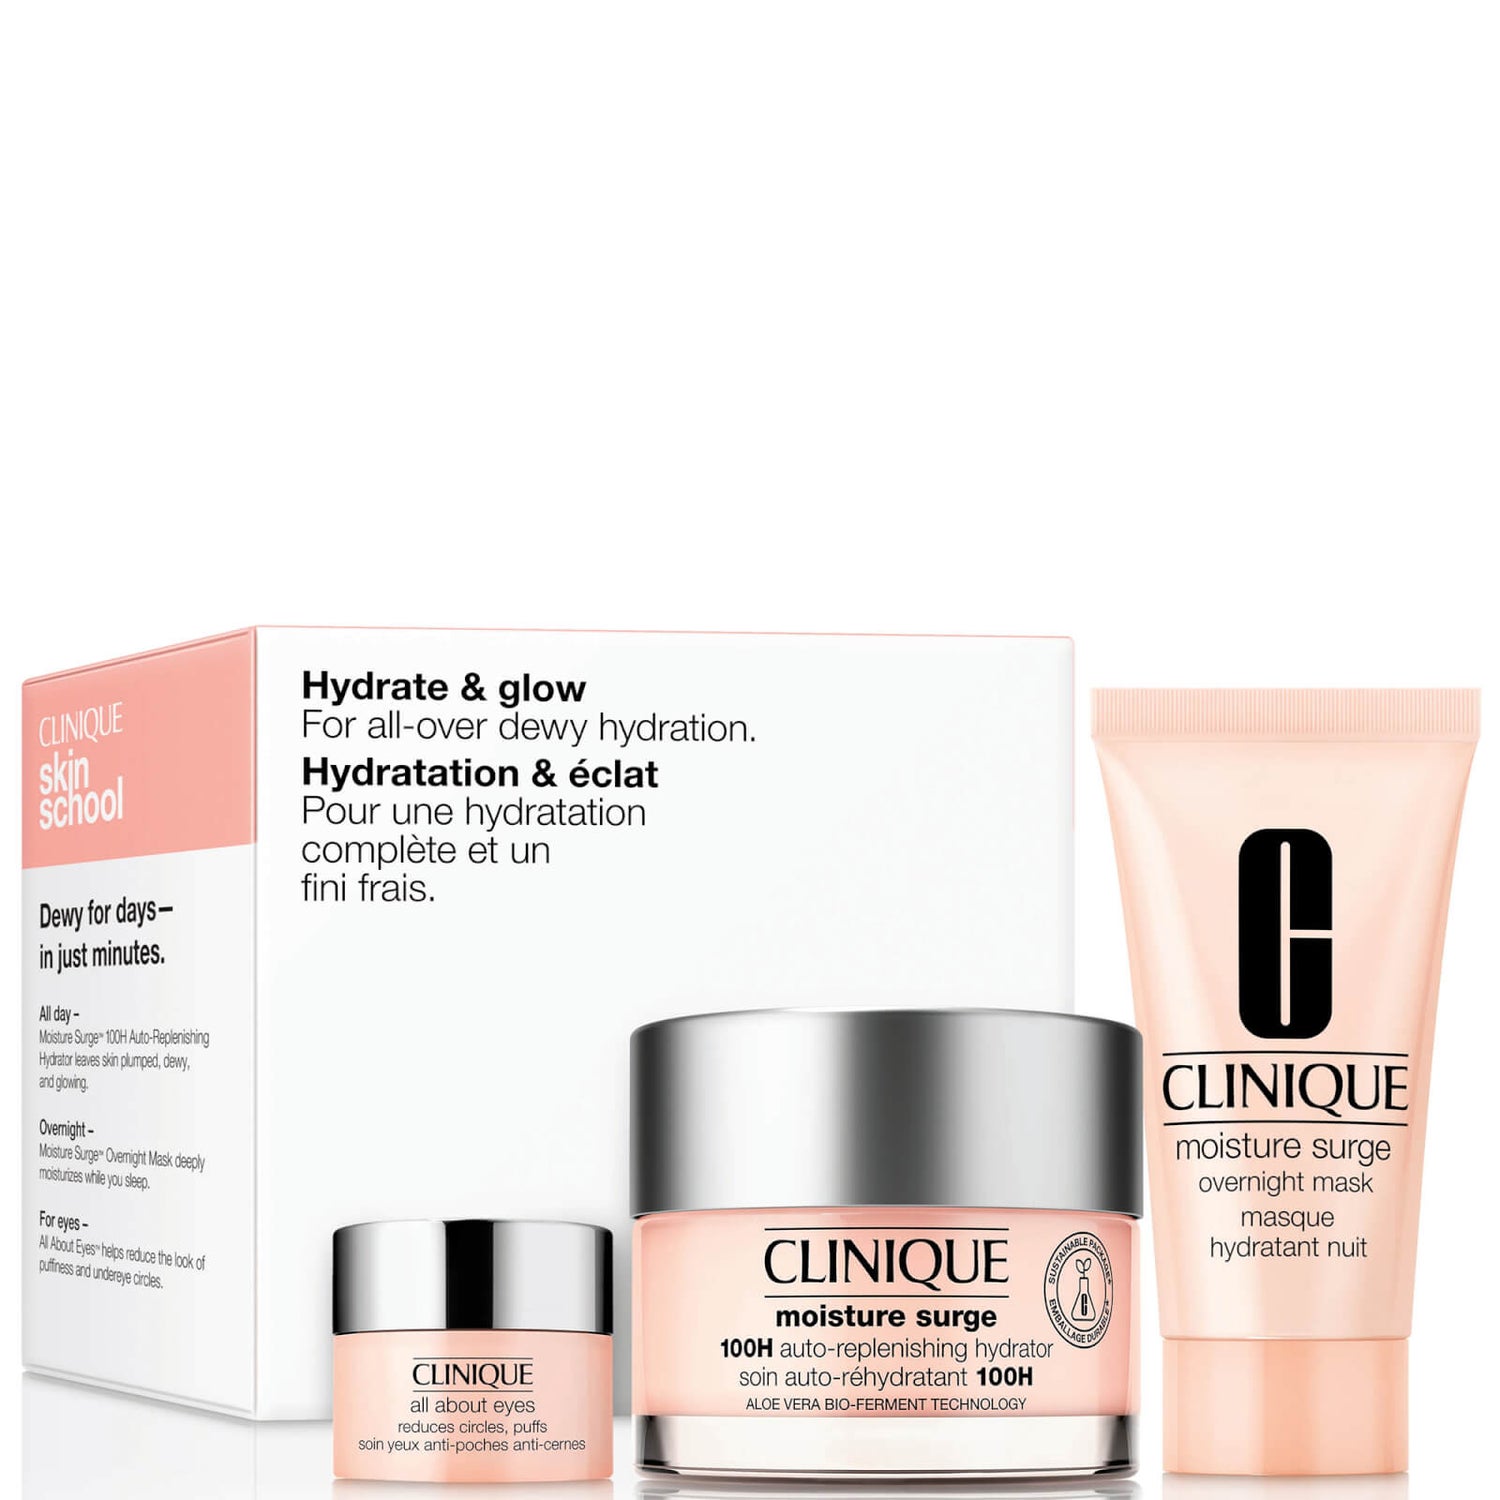 Clinique Hydrate & Glow Set A (Worth 61€)